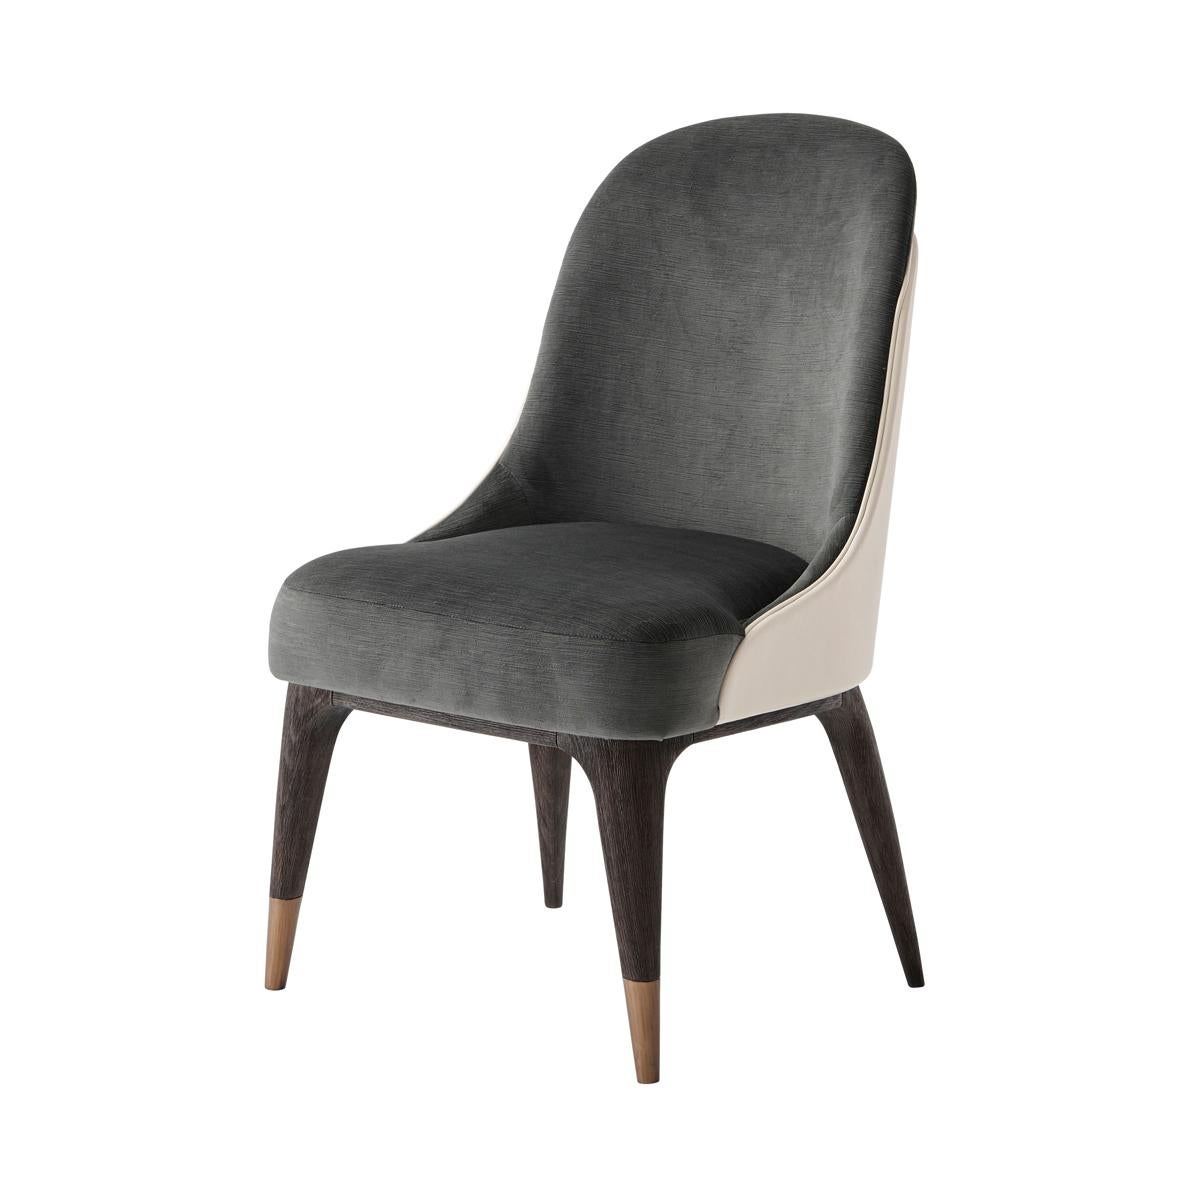 Contemporary Covet Modern Dining Chairs For Sale